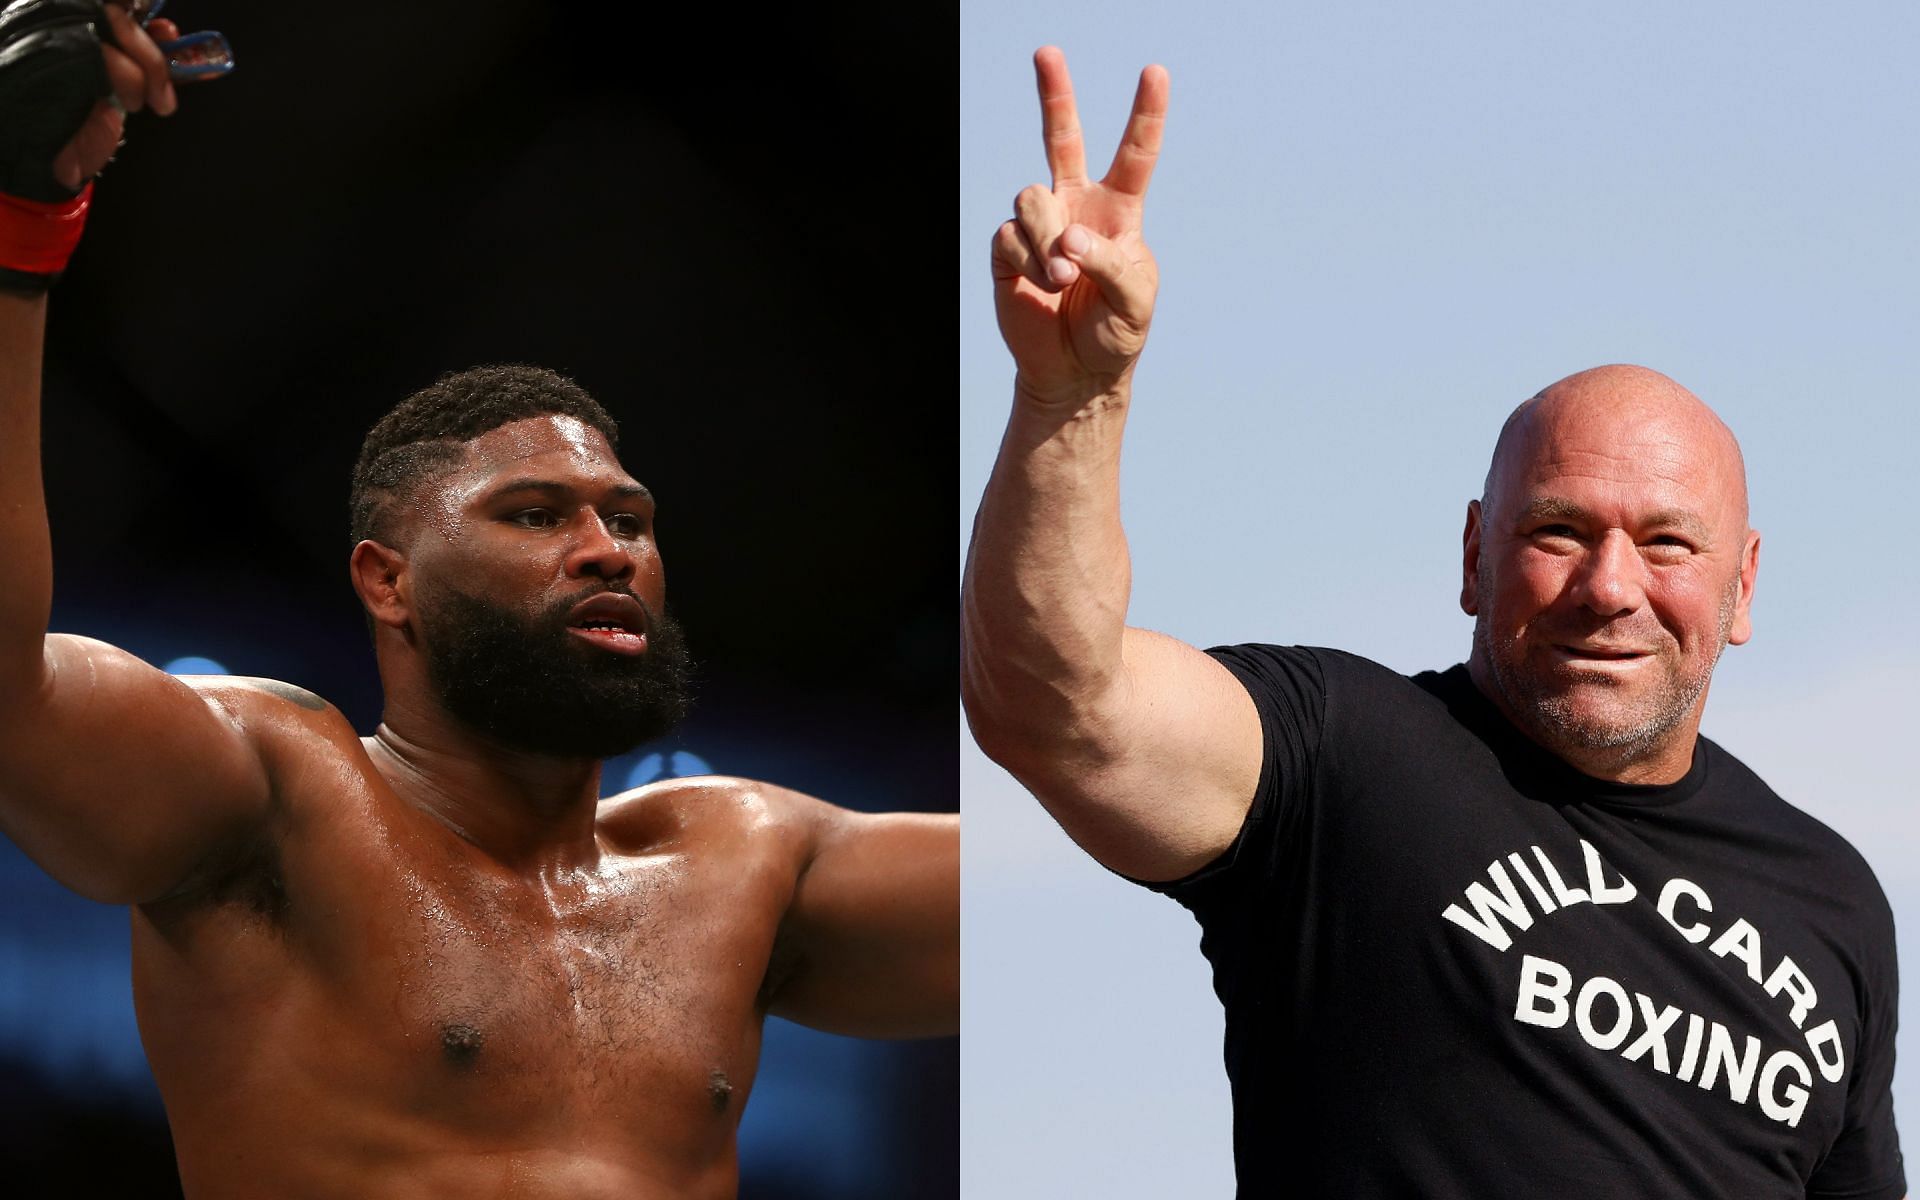 Curtis Blaydes (left) and Dana White (right) (Images via Getty)